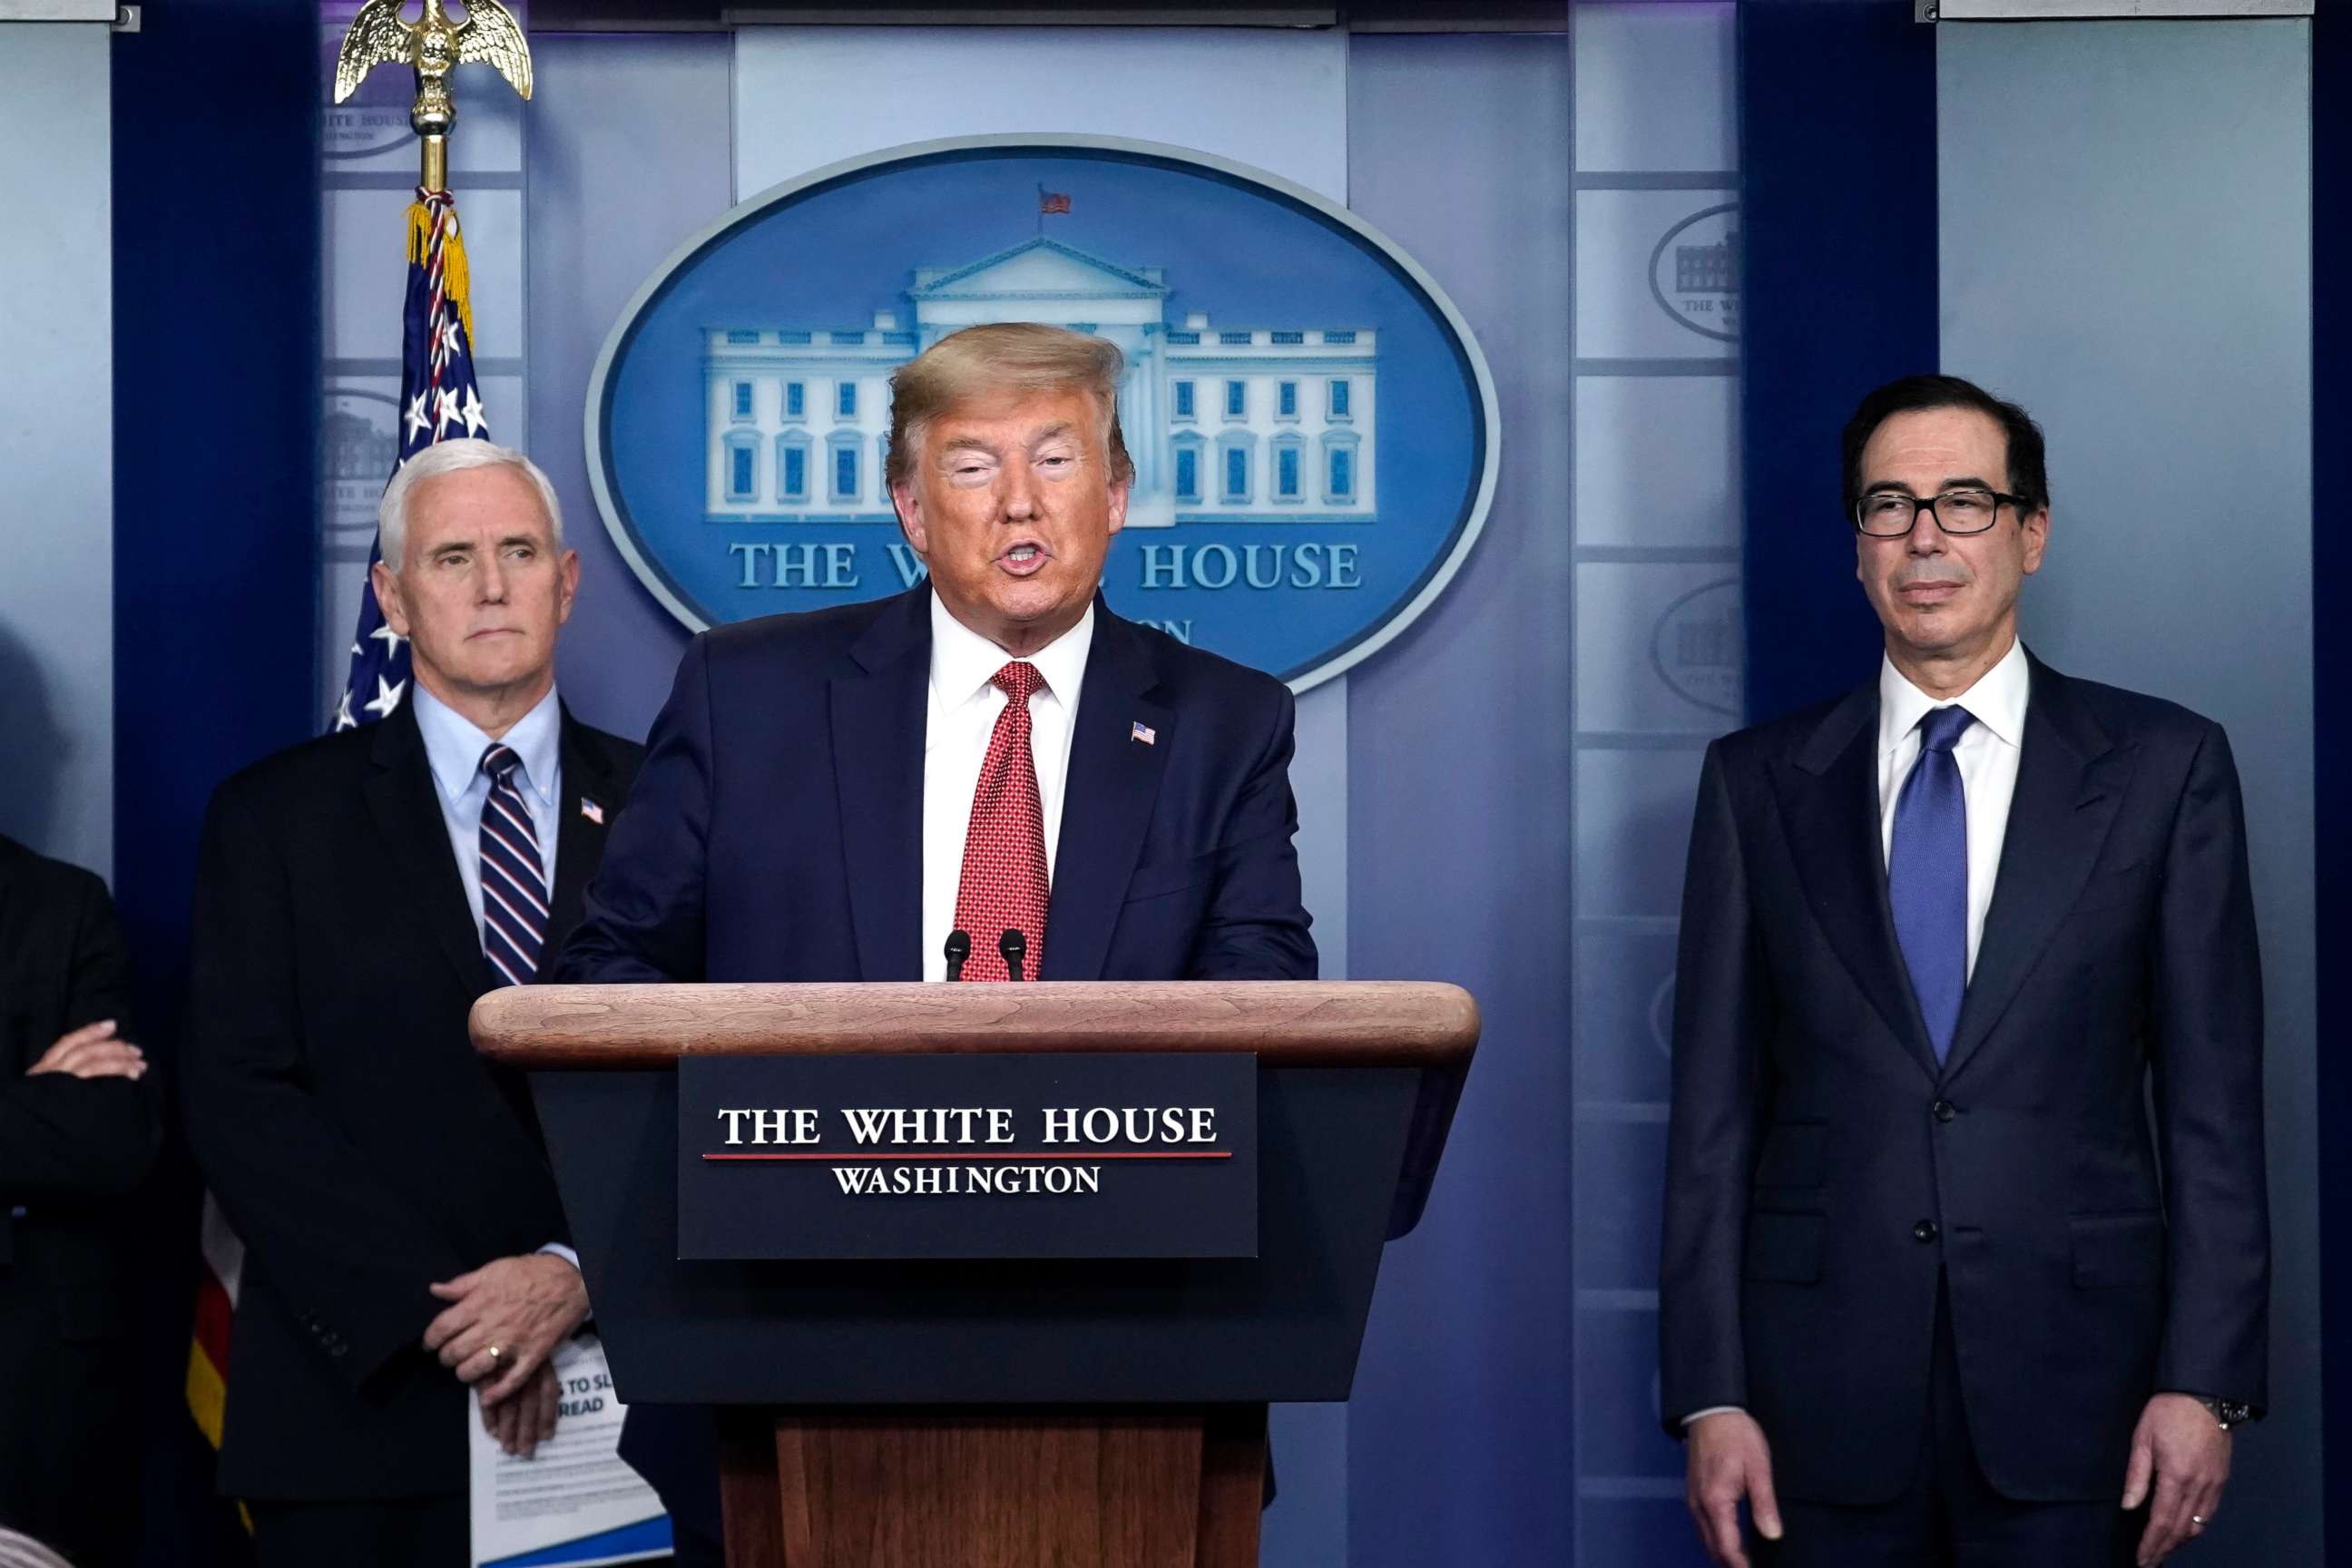 PHOTO: President Donald Trump, joined by Vice President Mike Pence and Secretary of the Treasury Steven Mnuchin, speaks during a briefing on the coronavirus pandemic, in the White House, March 25, 2020, in Washington.